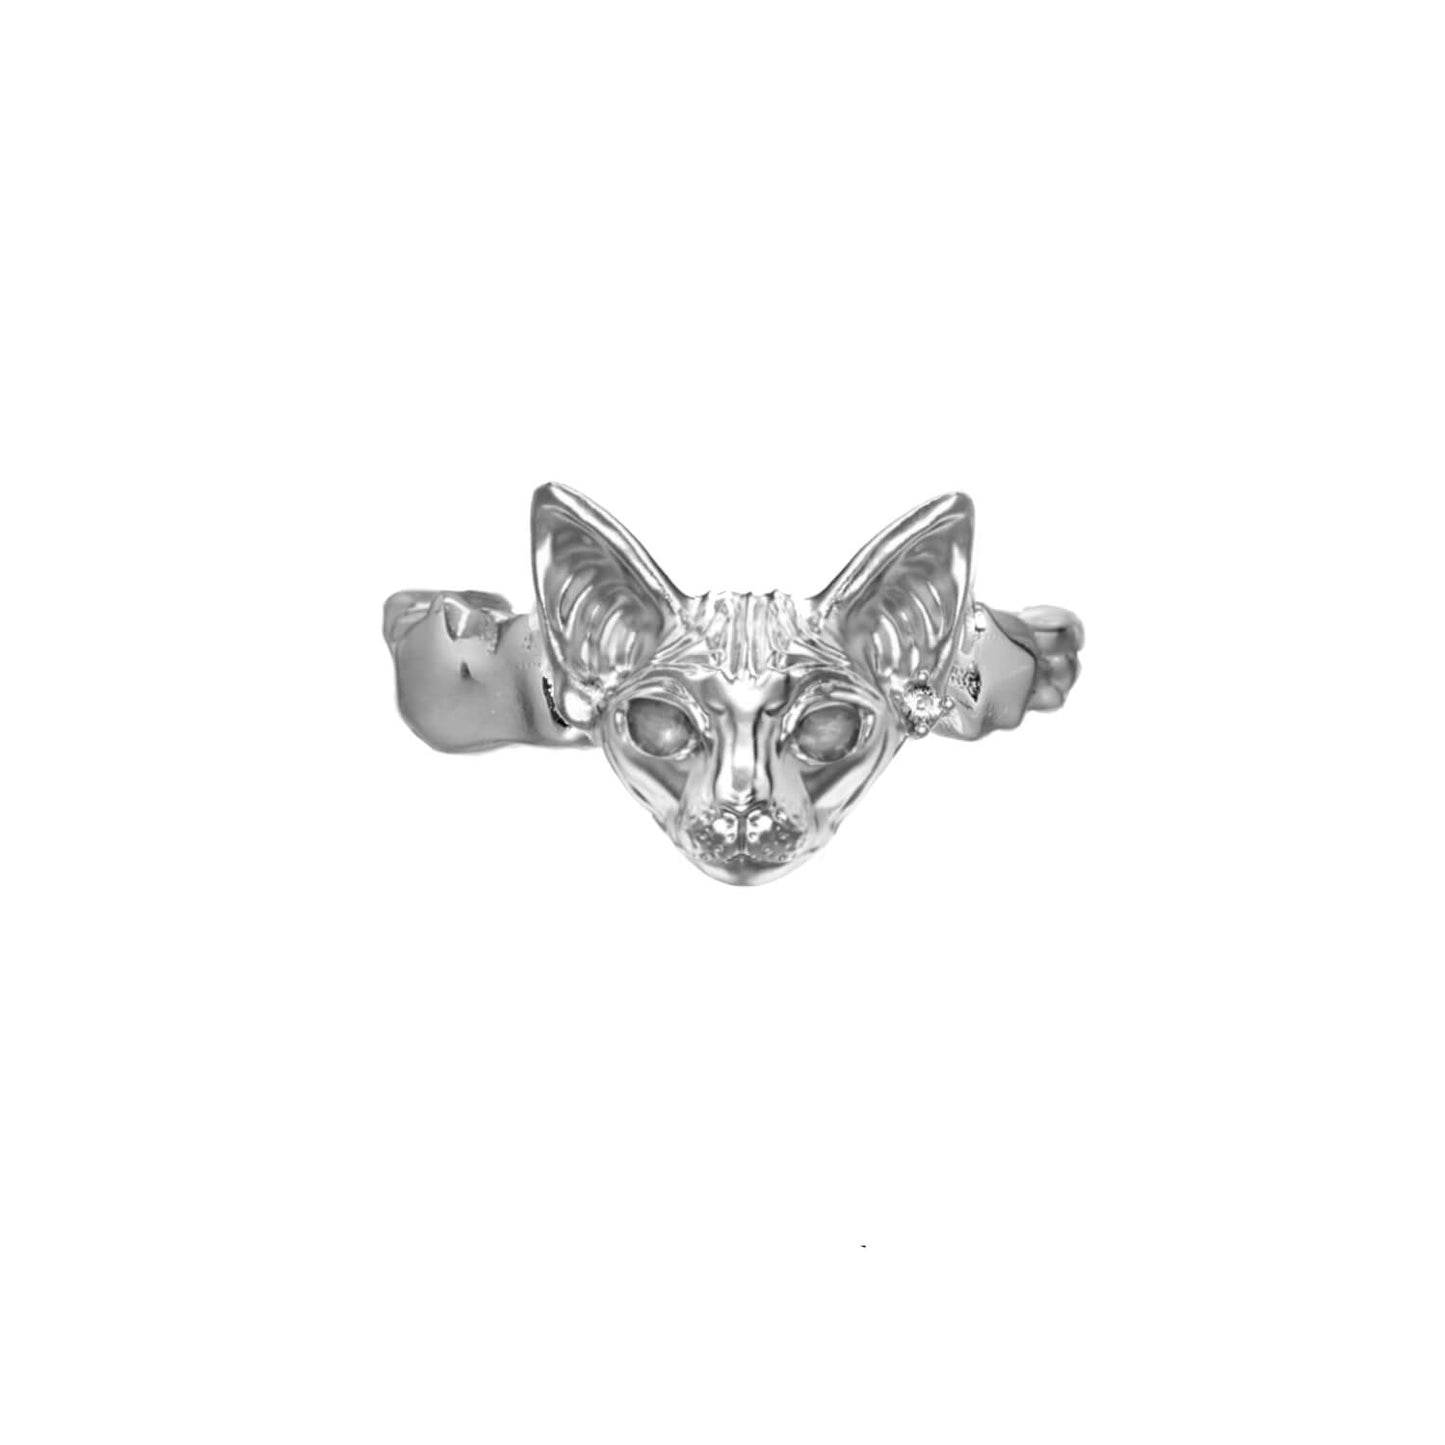 Miaowing Y2K S925 Silver Ring Cat  Buy at Khanie